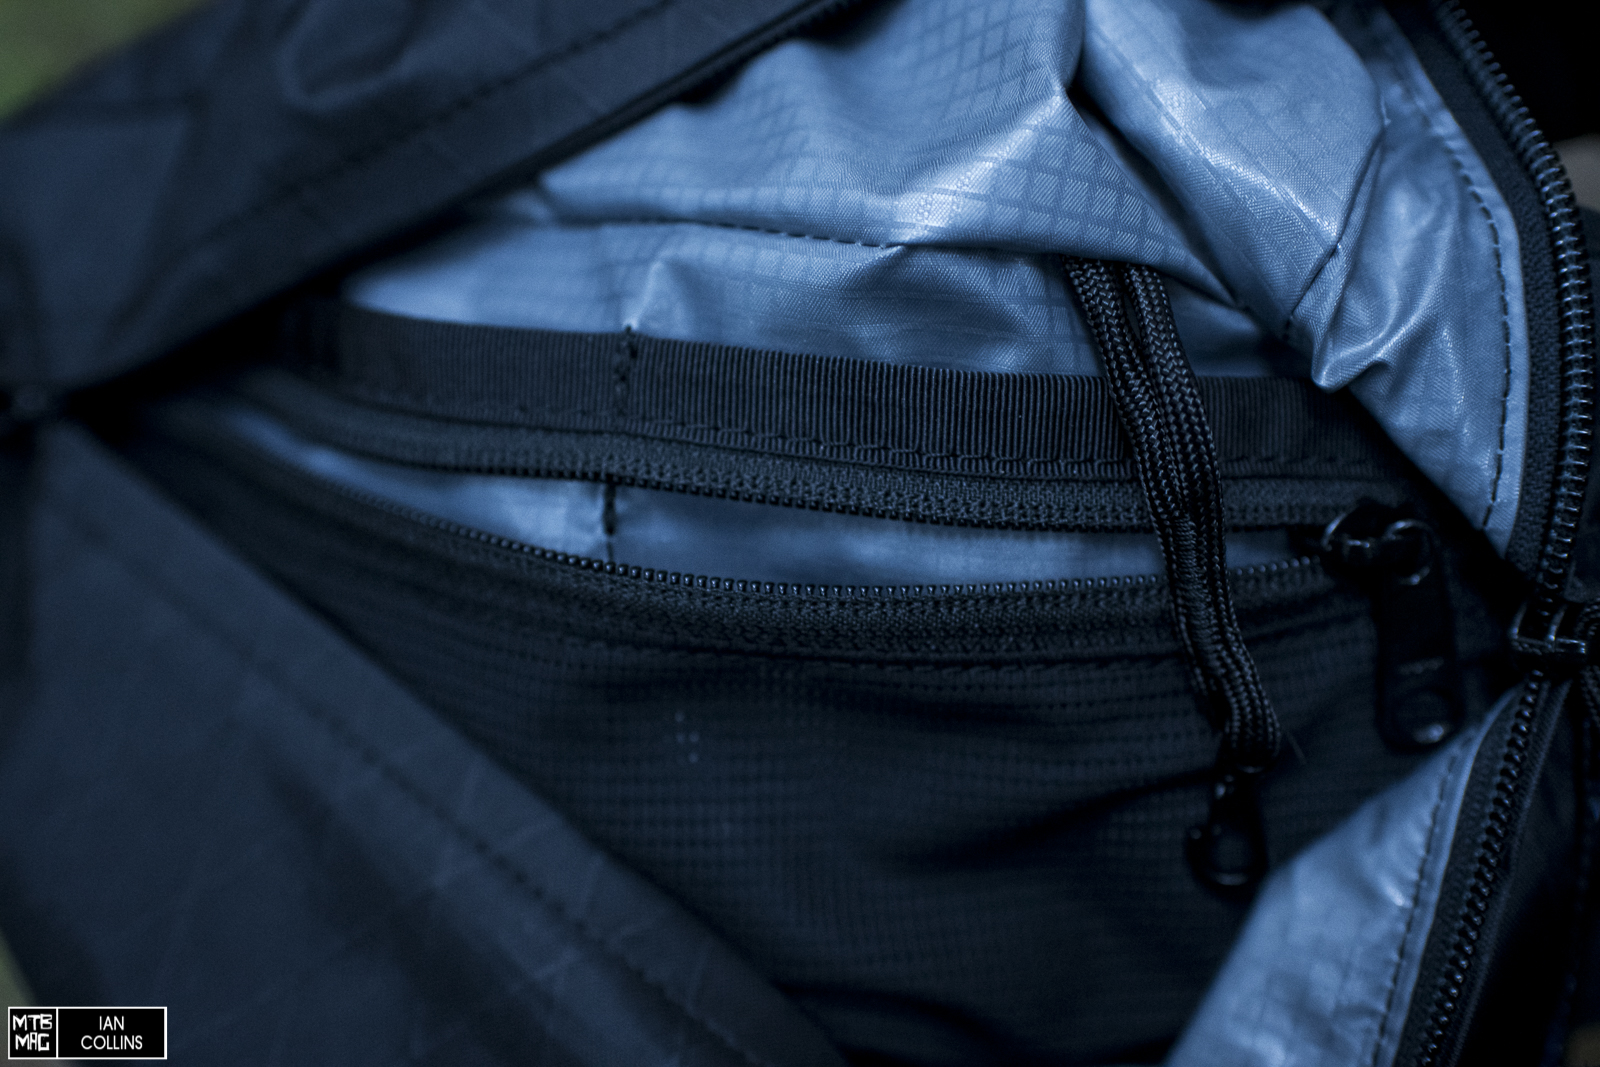 Mission Workshop Axis Modular Waist Pack Review (1 Week of Use) 